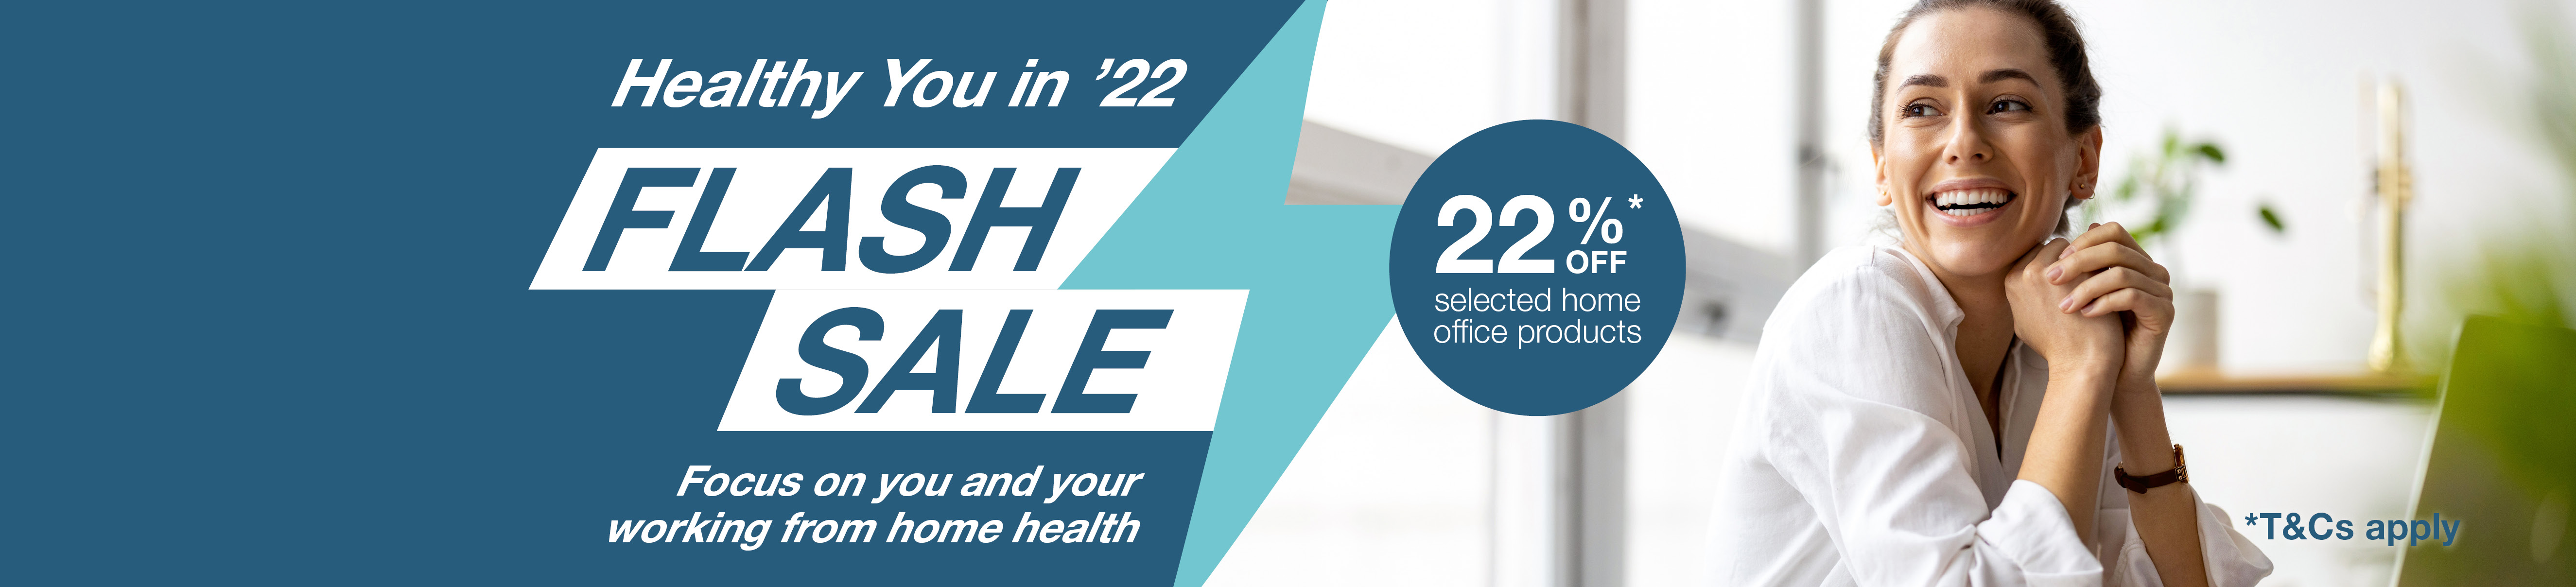 Healthy You in '22 Flash Sale